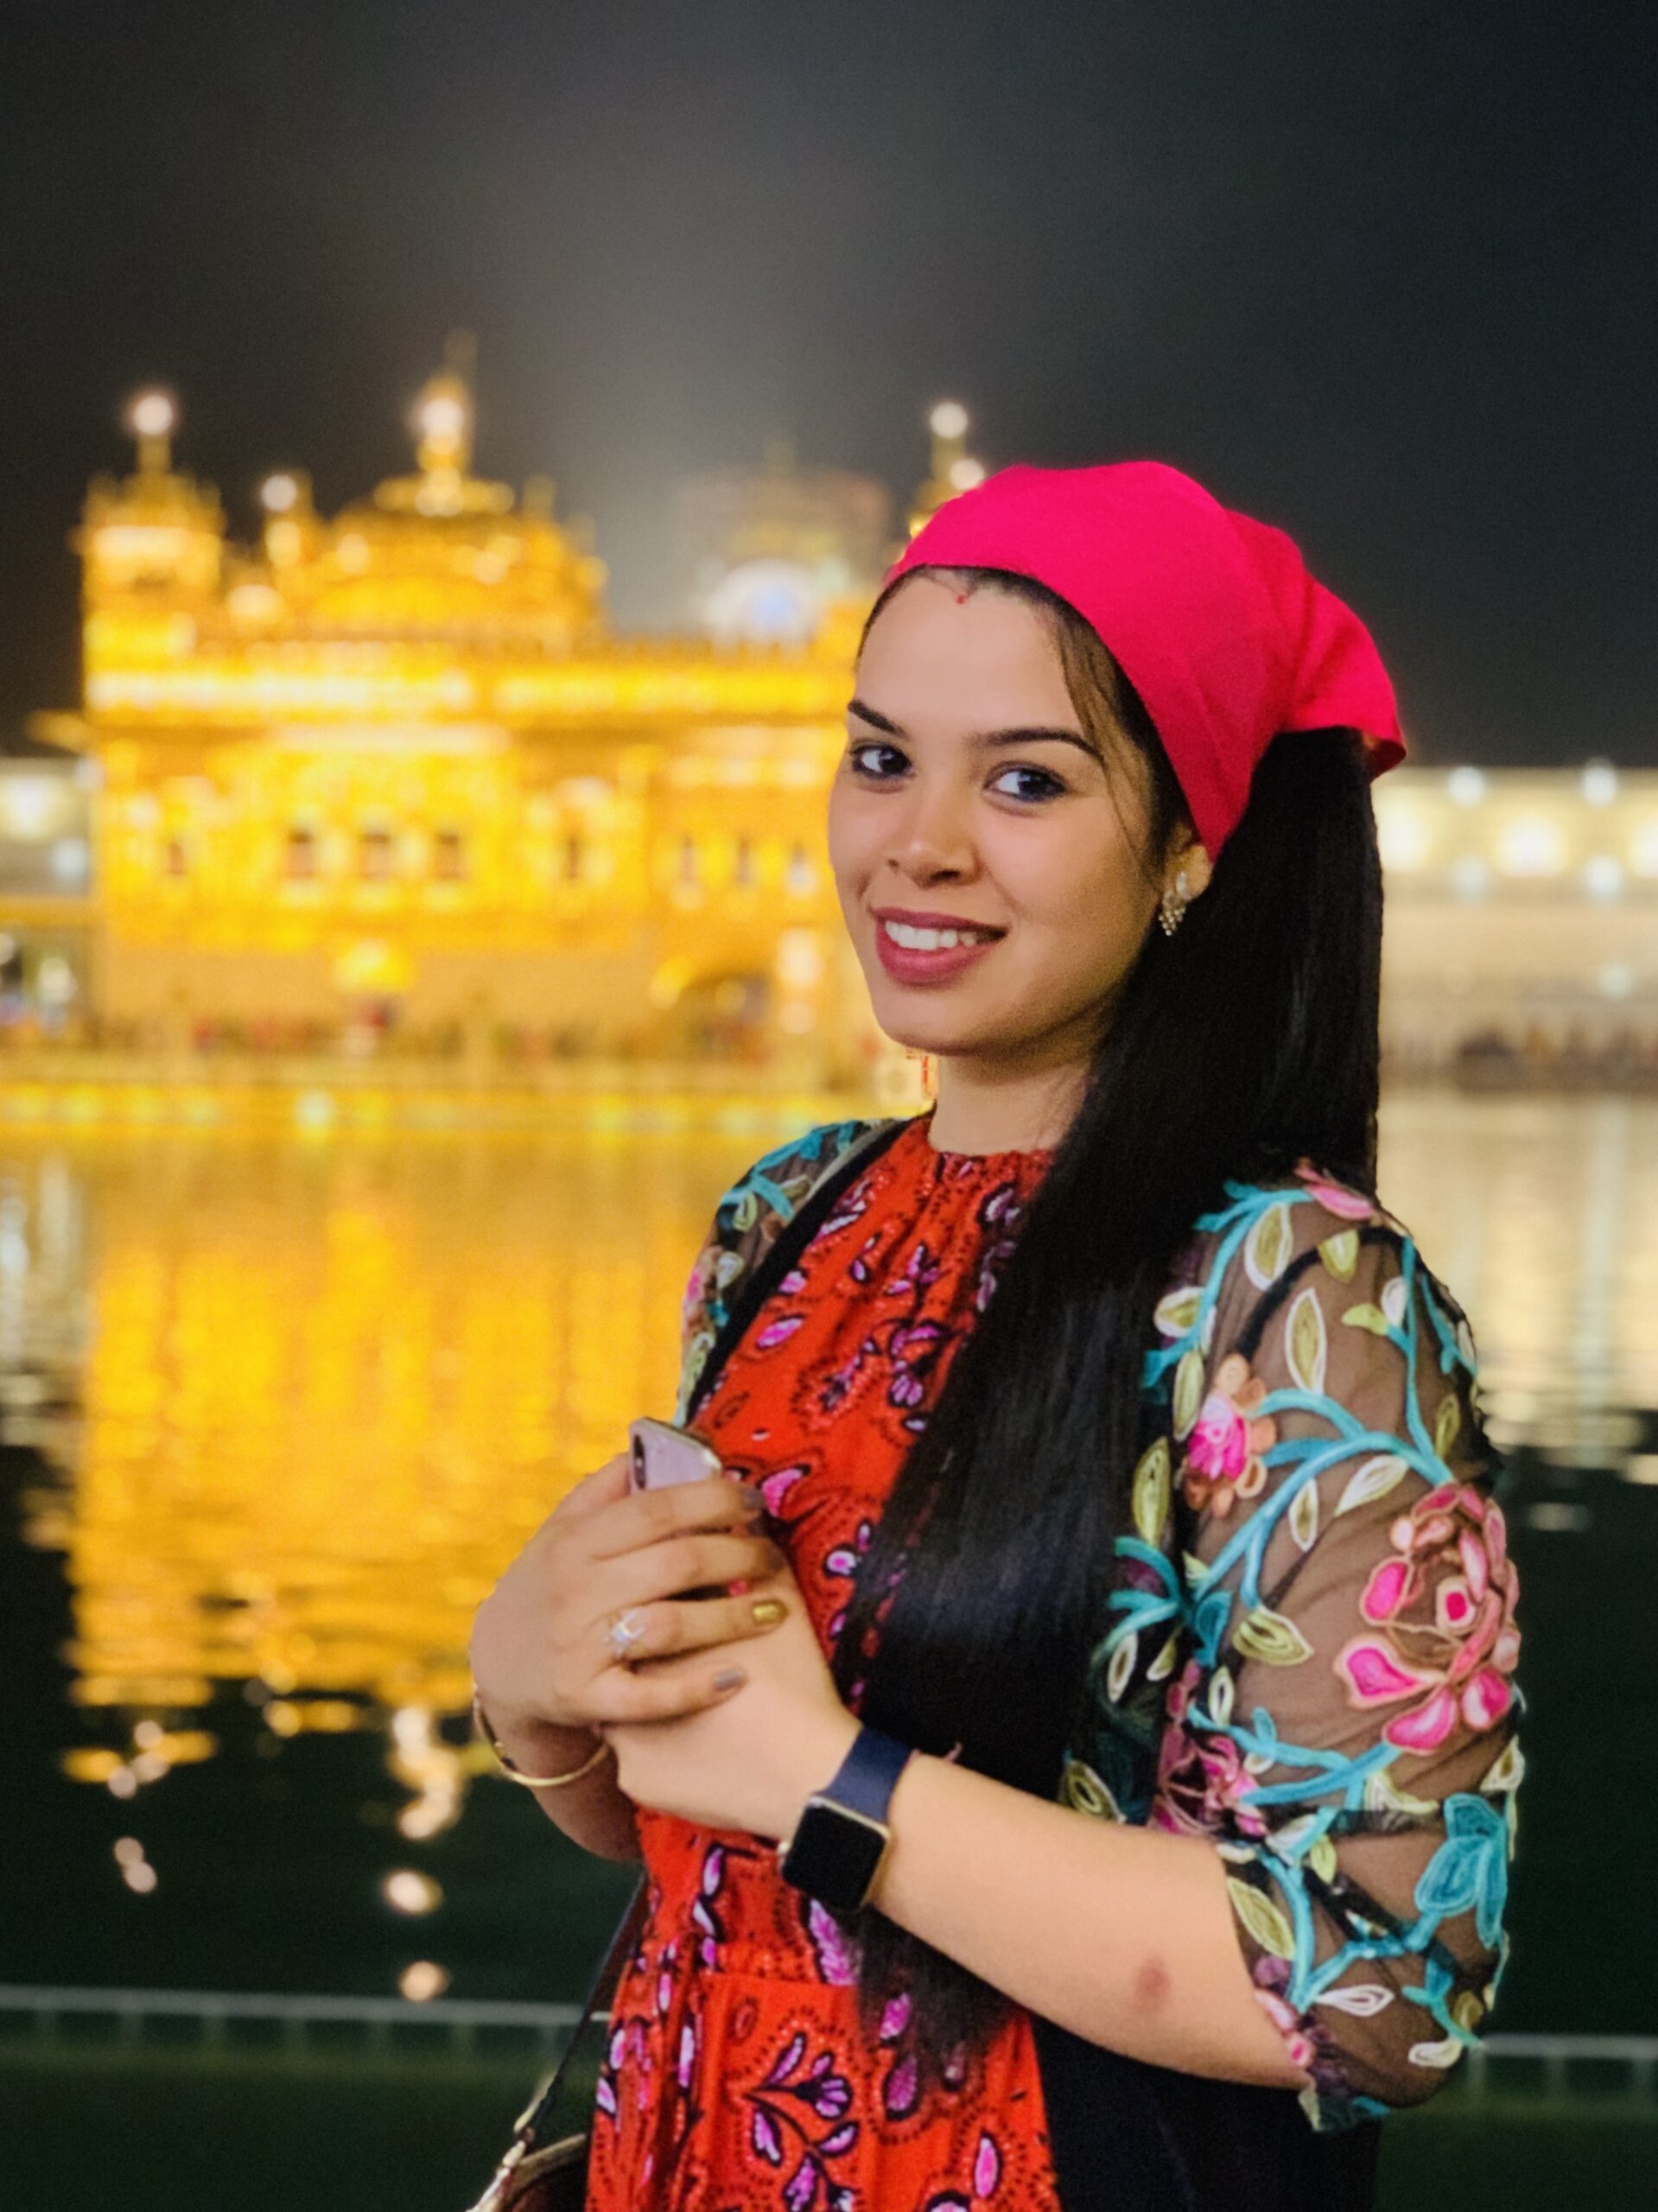 Golden Temple Solo Traveler on private India tour.